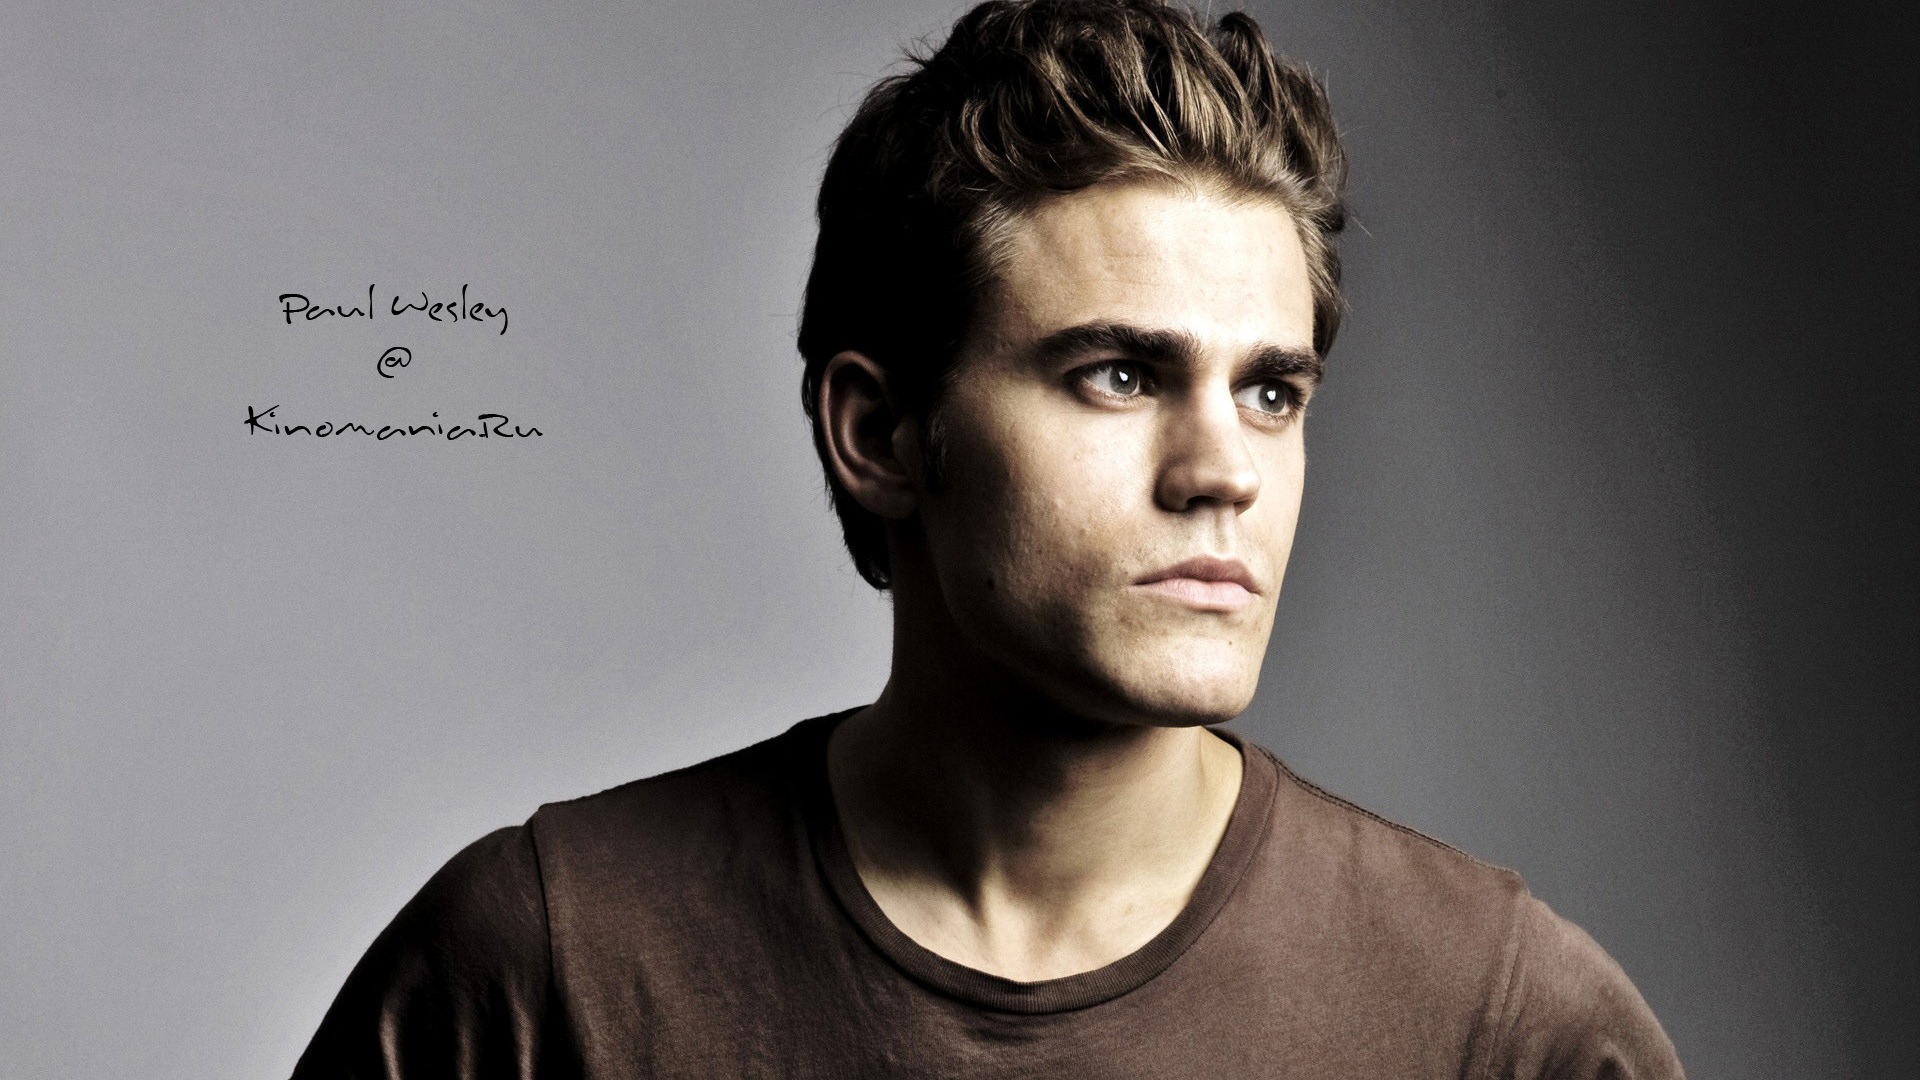 Paul Wesley Wallpaper Image Photos Pictures Background